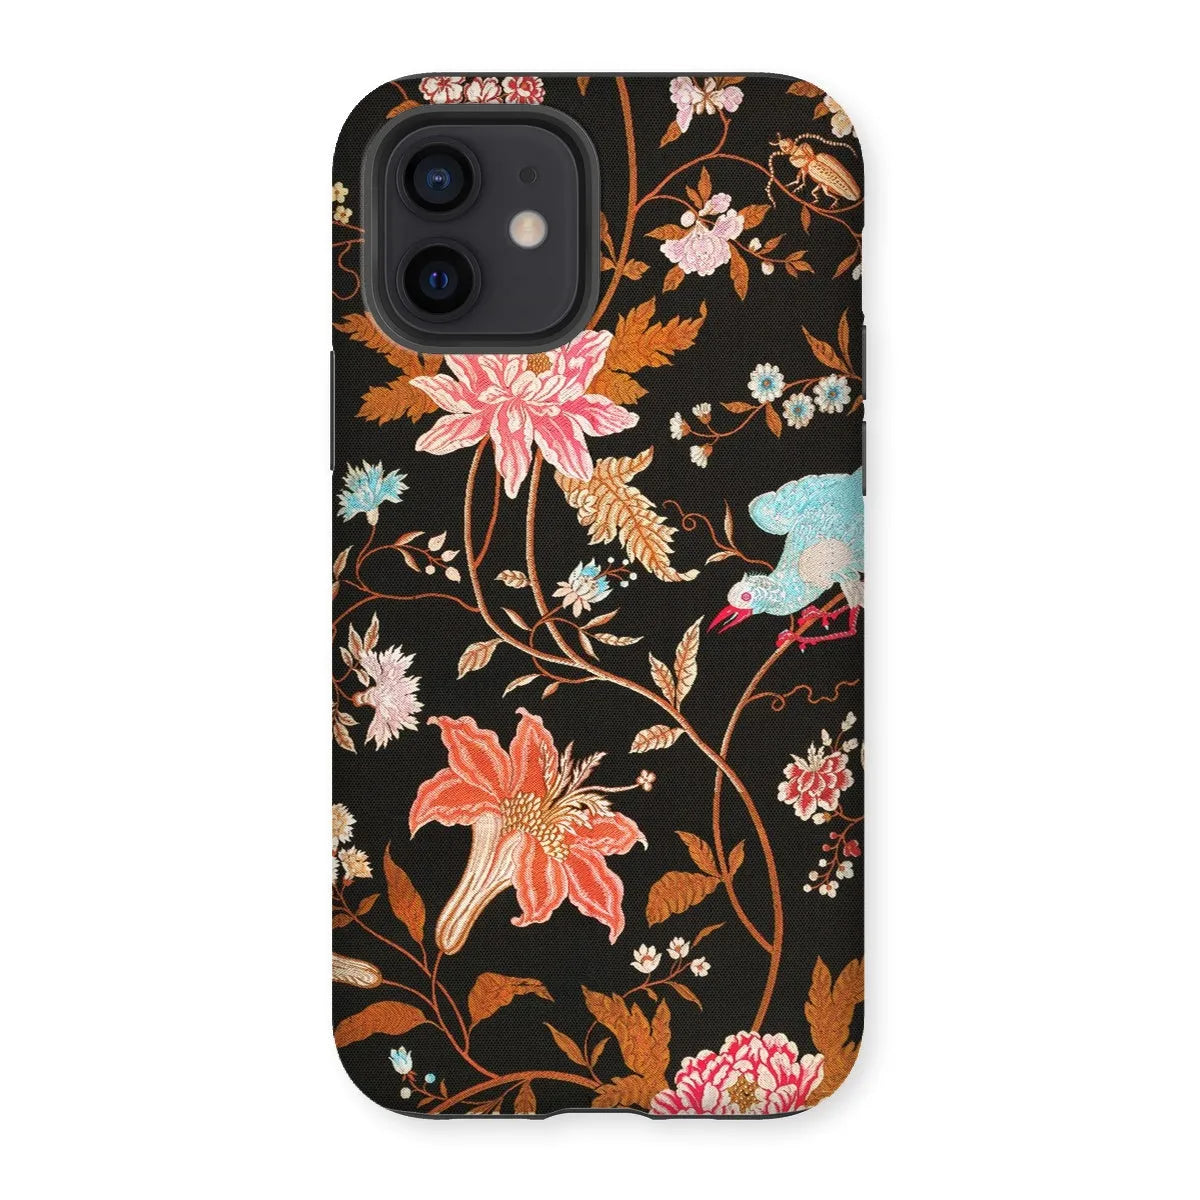 Midnight Call - Indian Aesthetic Fabric Art Phone Case - Iphone 12 / Matte - Mobile Phone Cases - Aesthetic Art